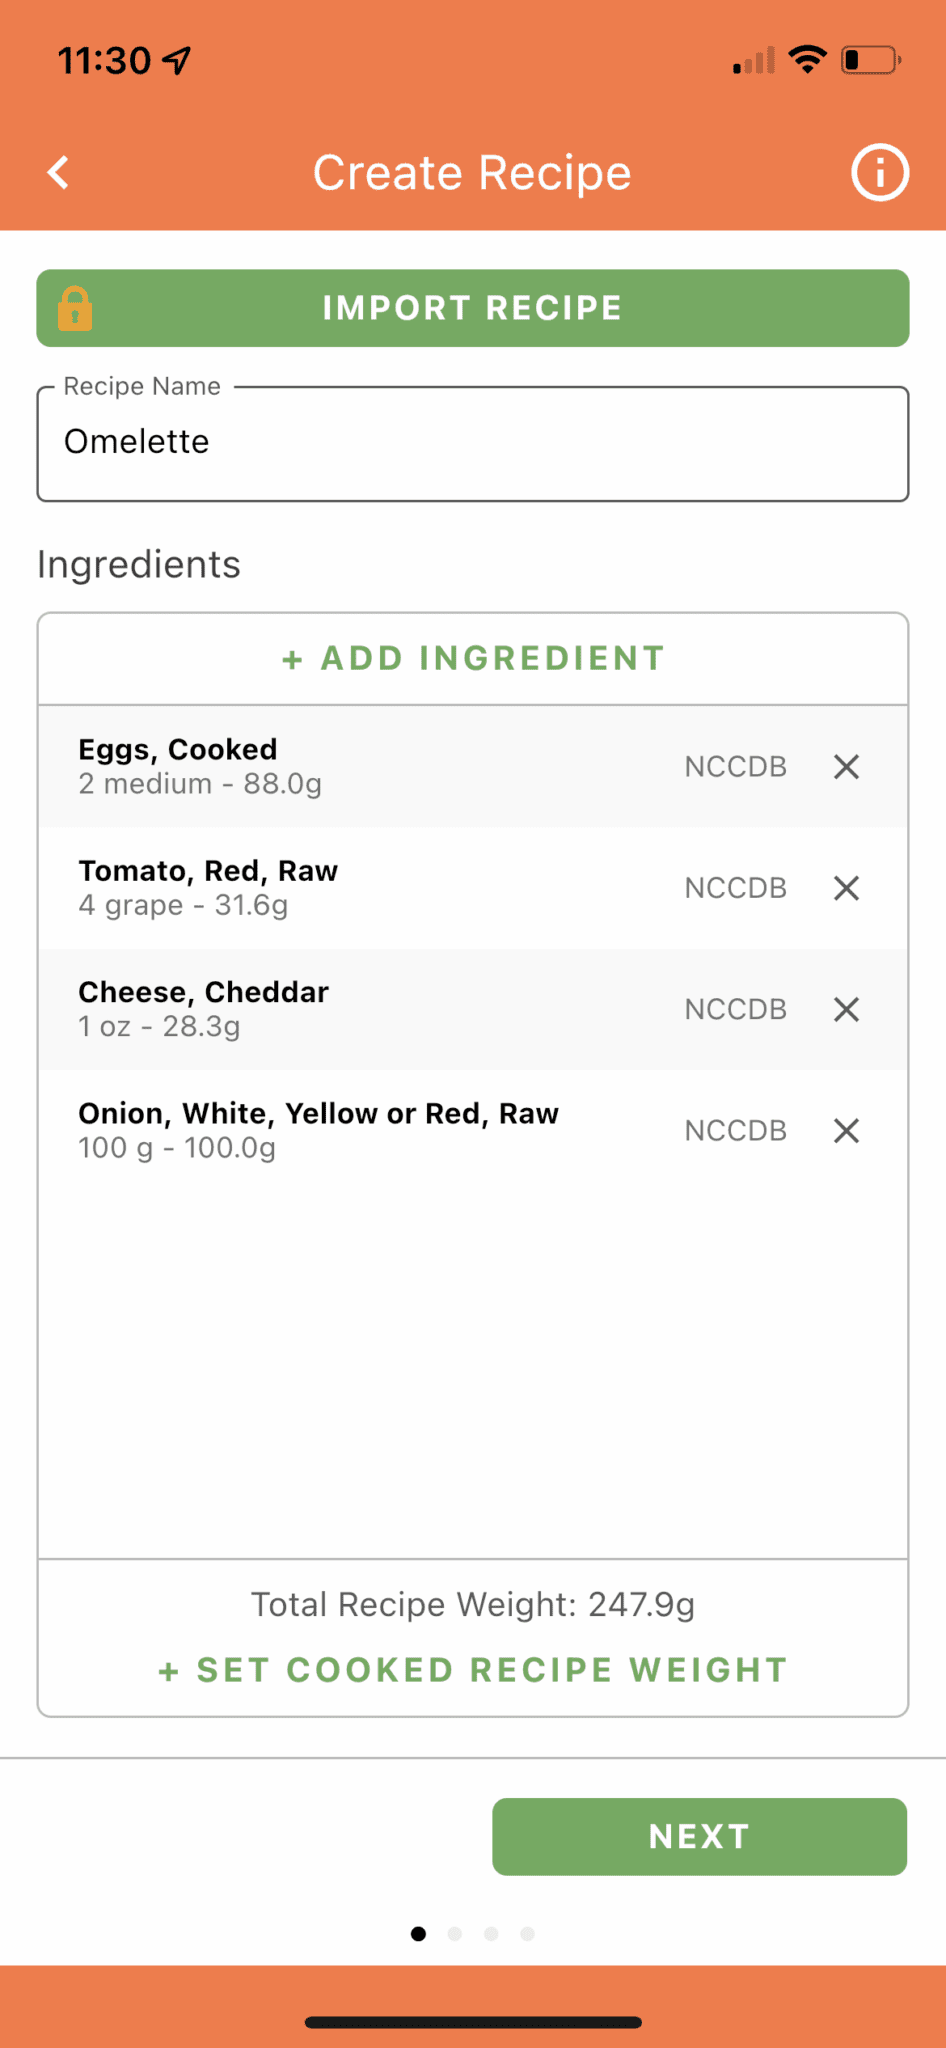 Add all of the the ingredients